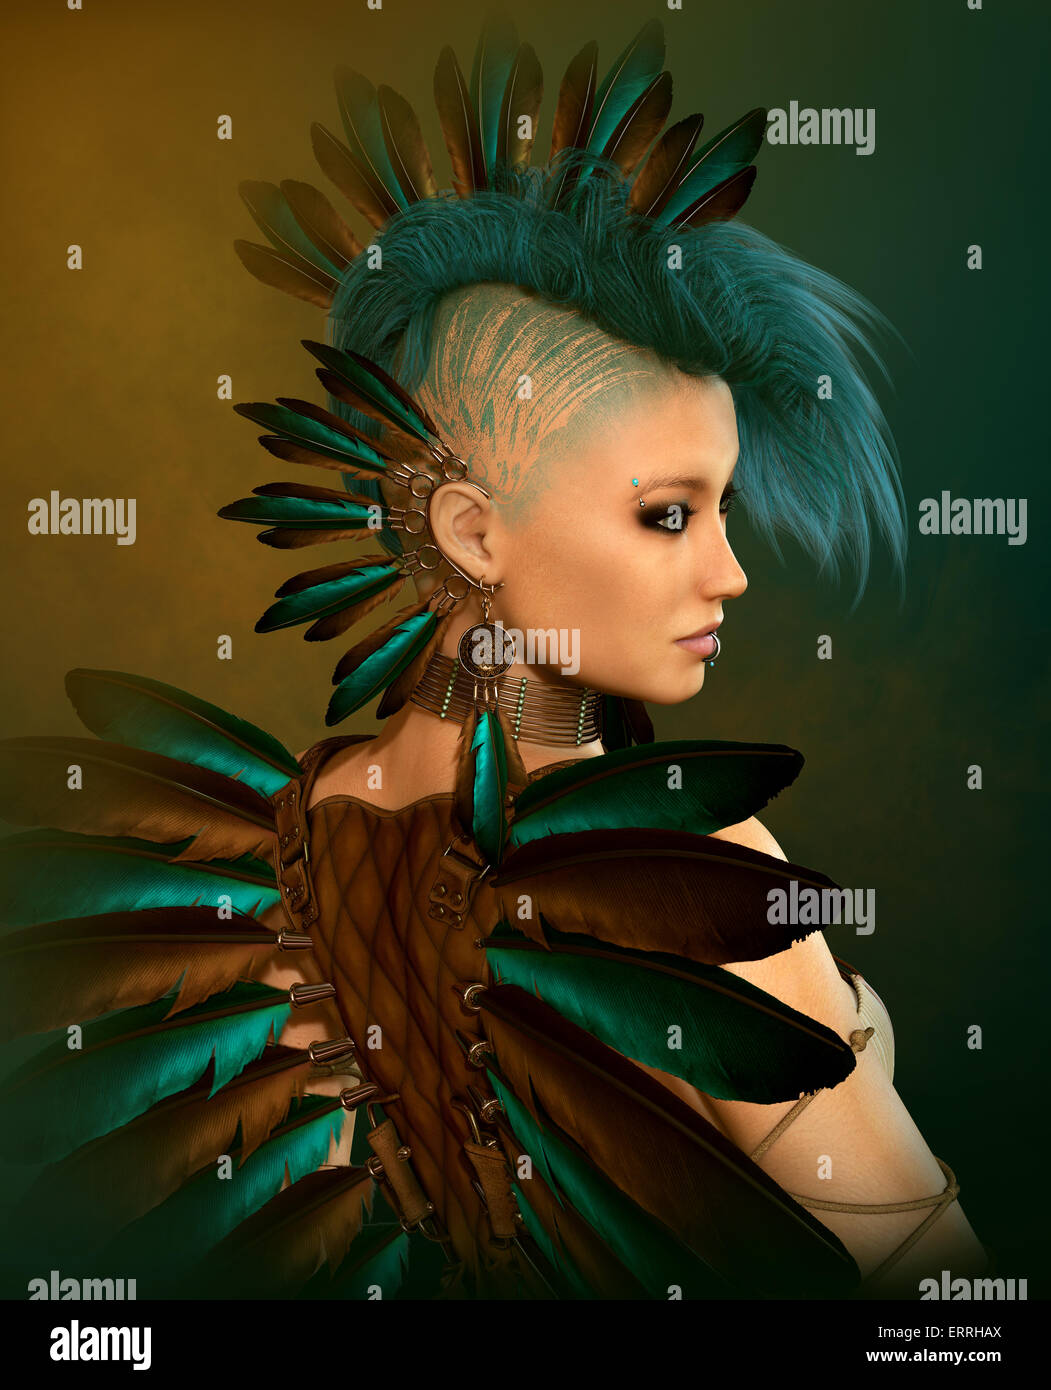 3d computer graphics of a young woman with feather jewelry and a Mohawk hairstyle Stock Photo